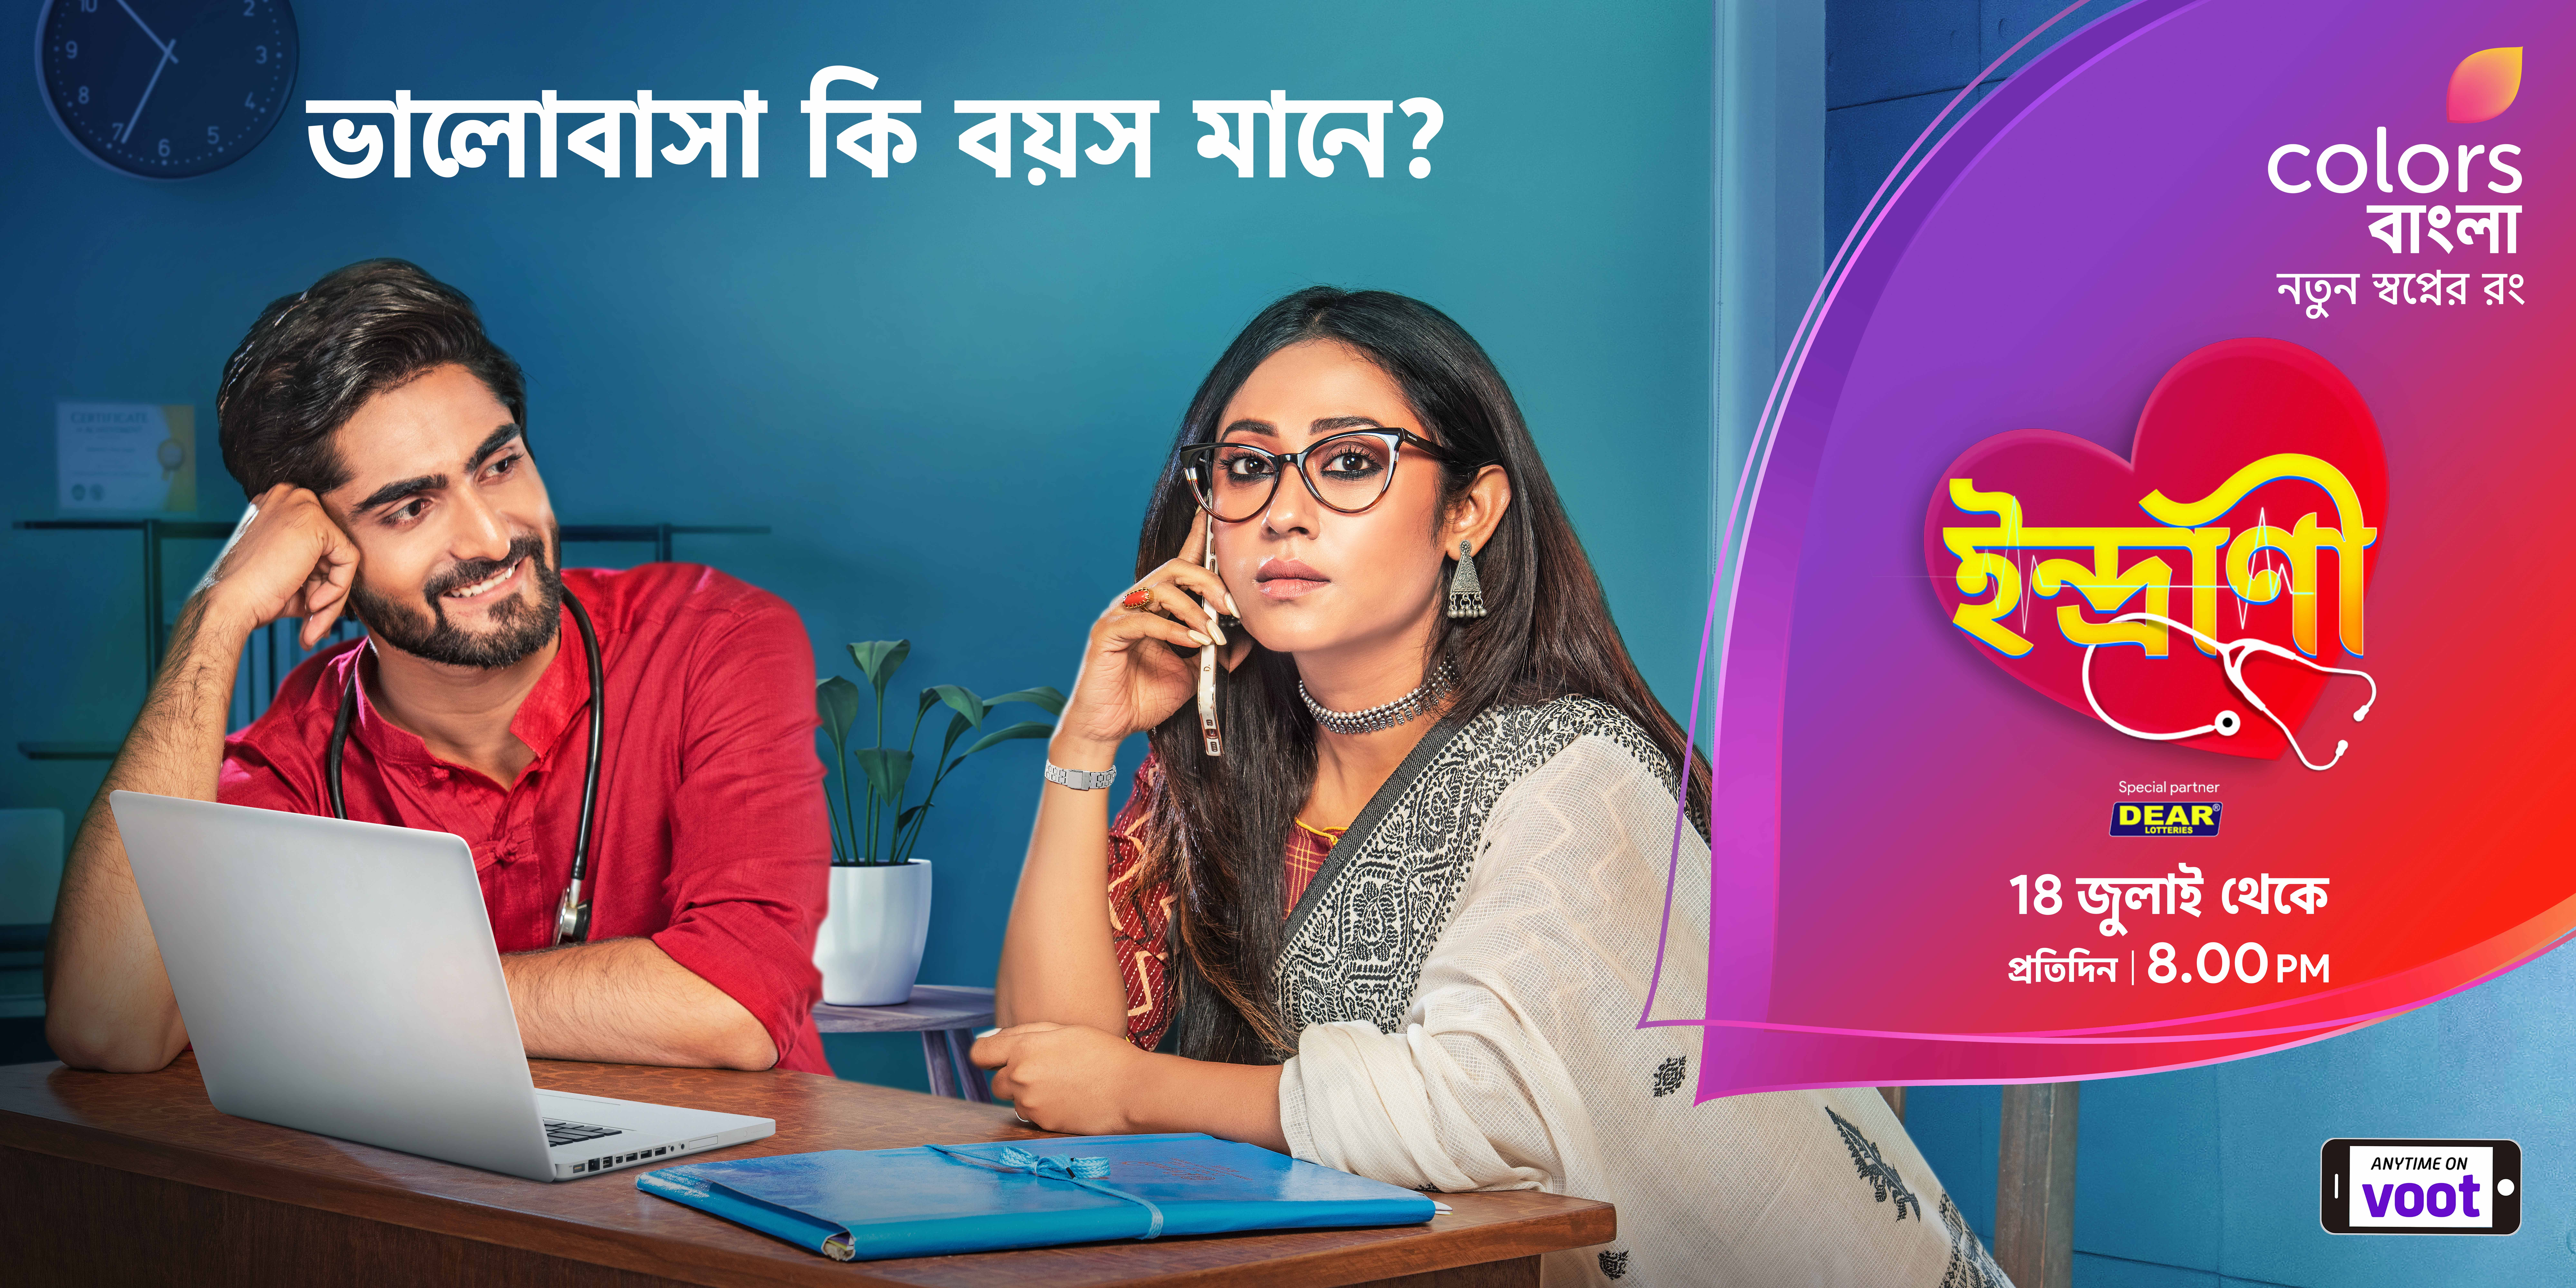 Colors Bangla launches an unconventional love story with Indrani